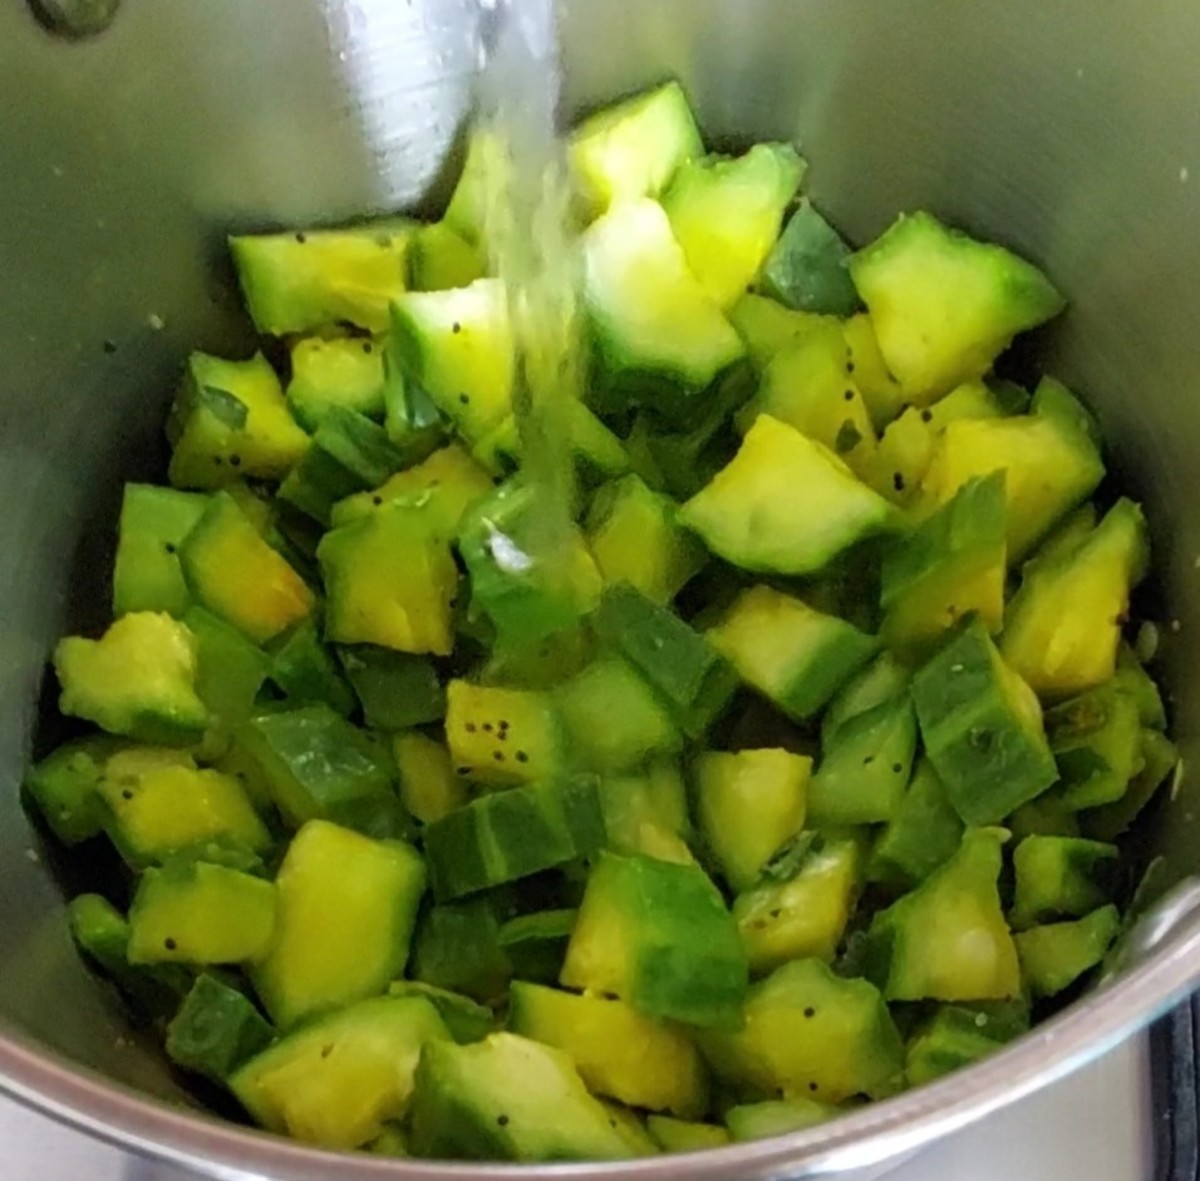 Add 1/2 cup of water, close the lid and cook till ridge gourd is cooked well.